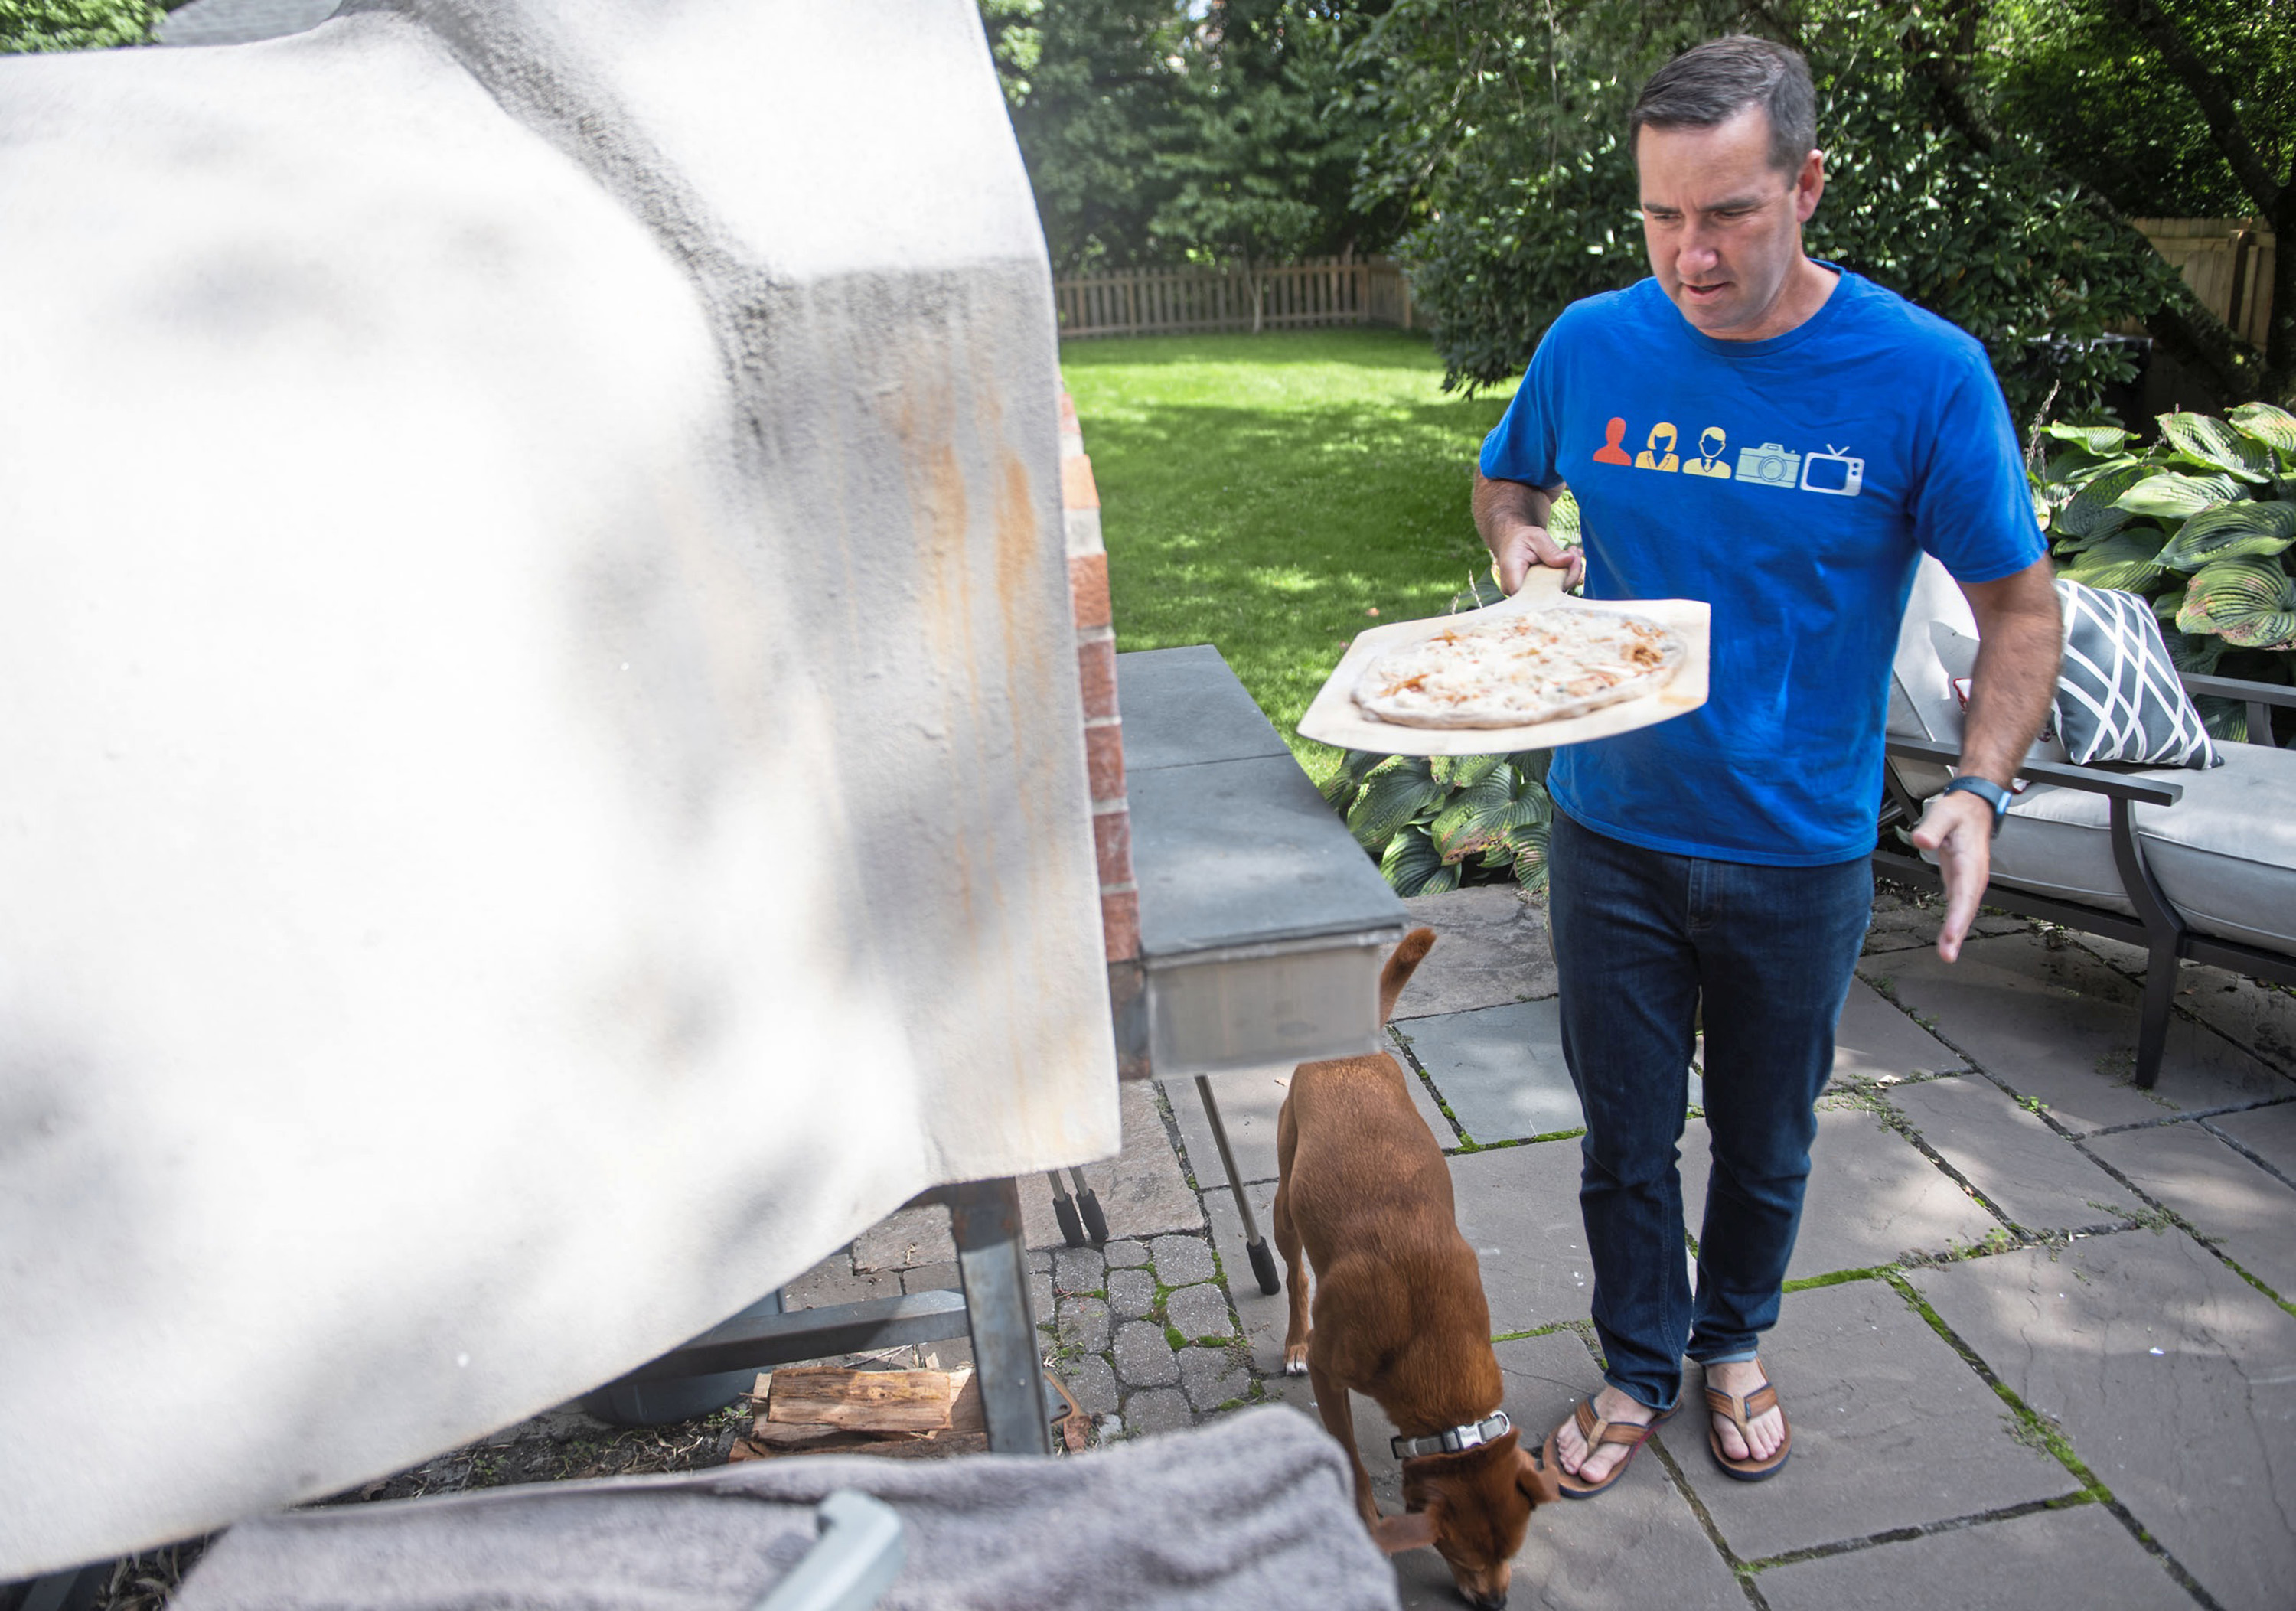 Chris Hayes prepares to put a buffalo chicken pizza in his pizza oven while his dog Charlie looks for any fallen pizza toppings